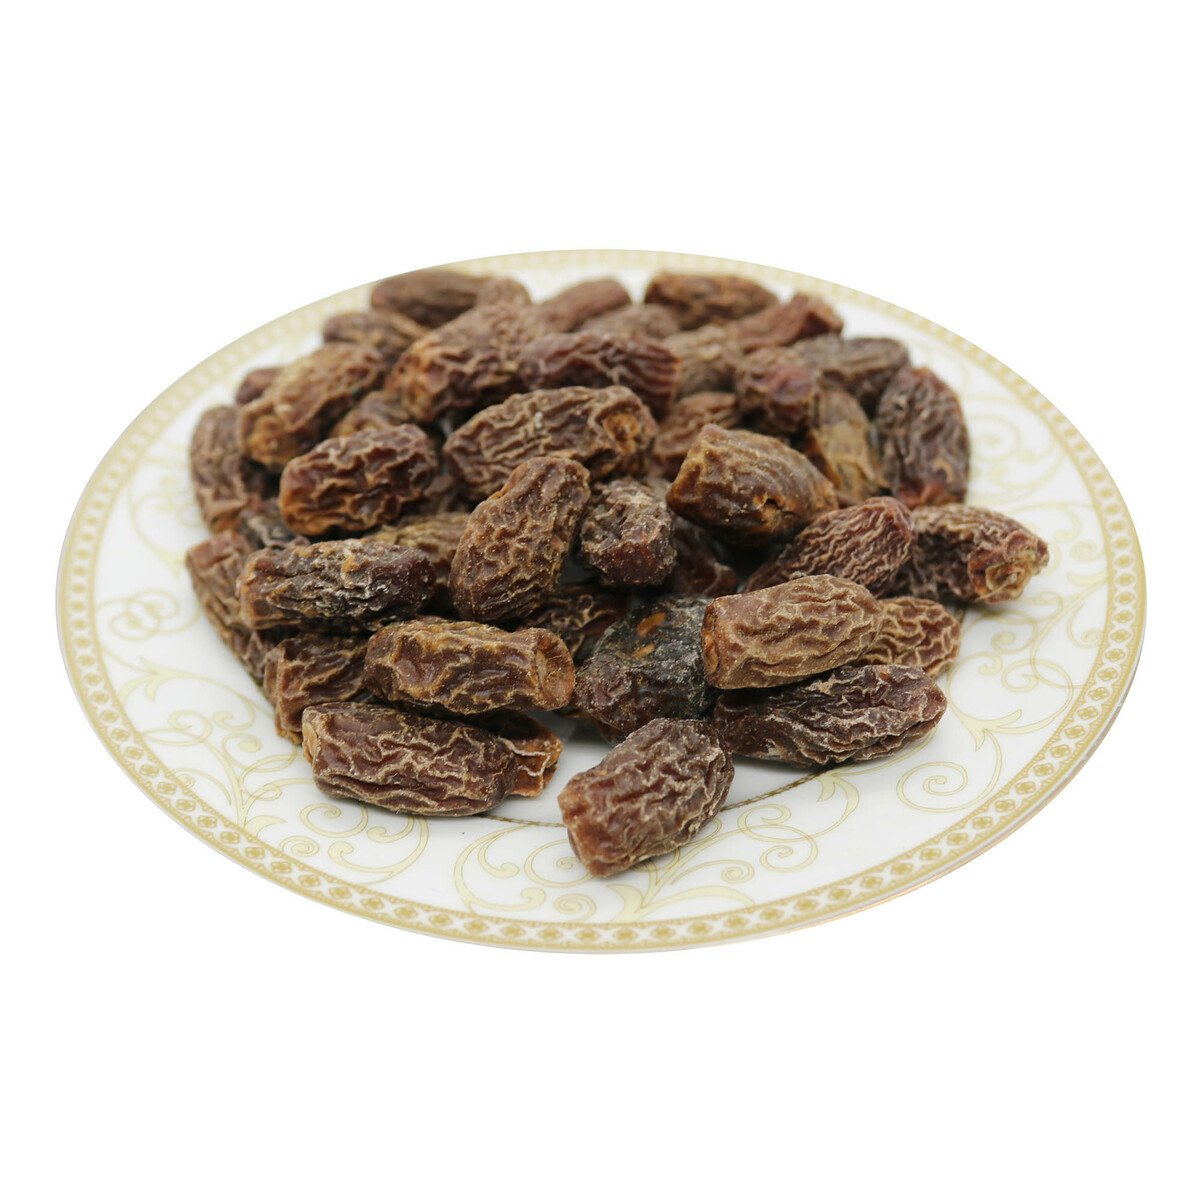 Dry Dates Black 500g Approx Weight